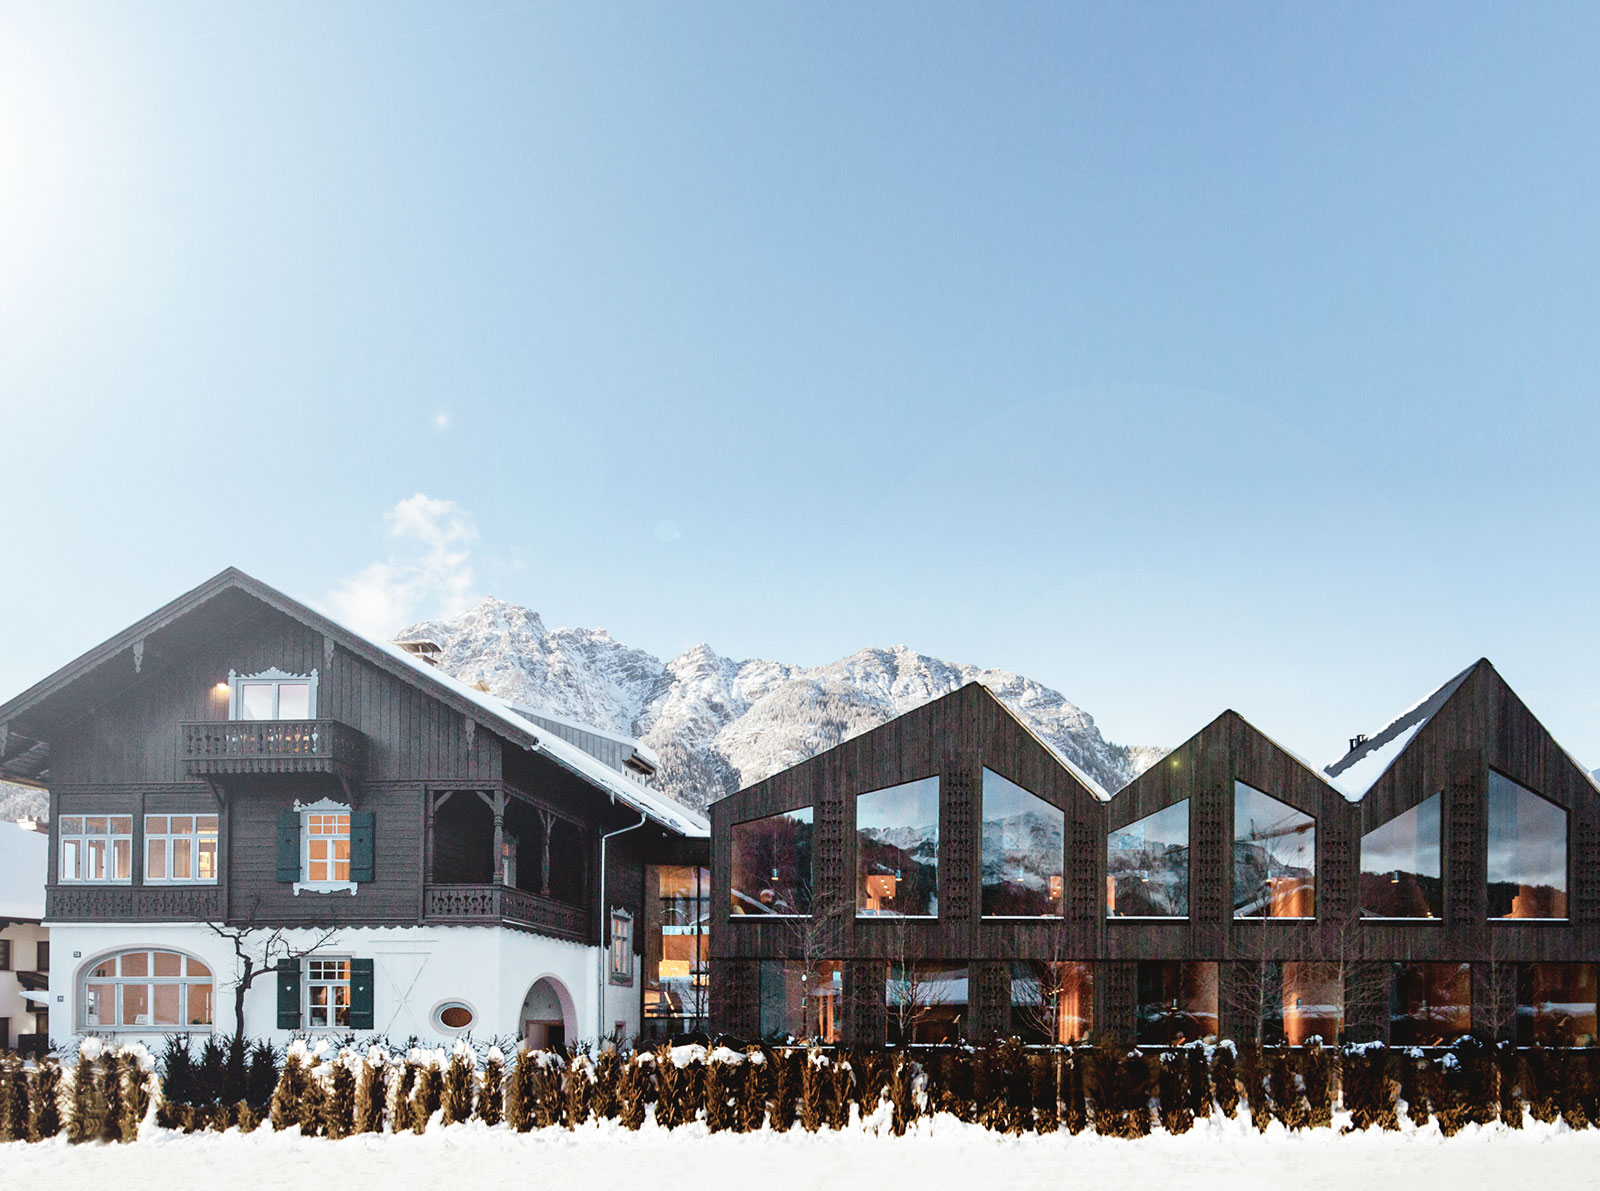 Pretty Hotels: Where to Stay in Your Ski Holidays (Image 16)